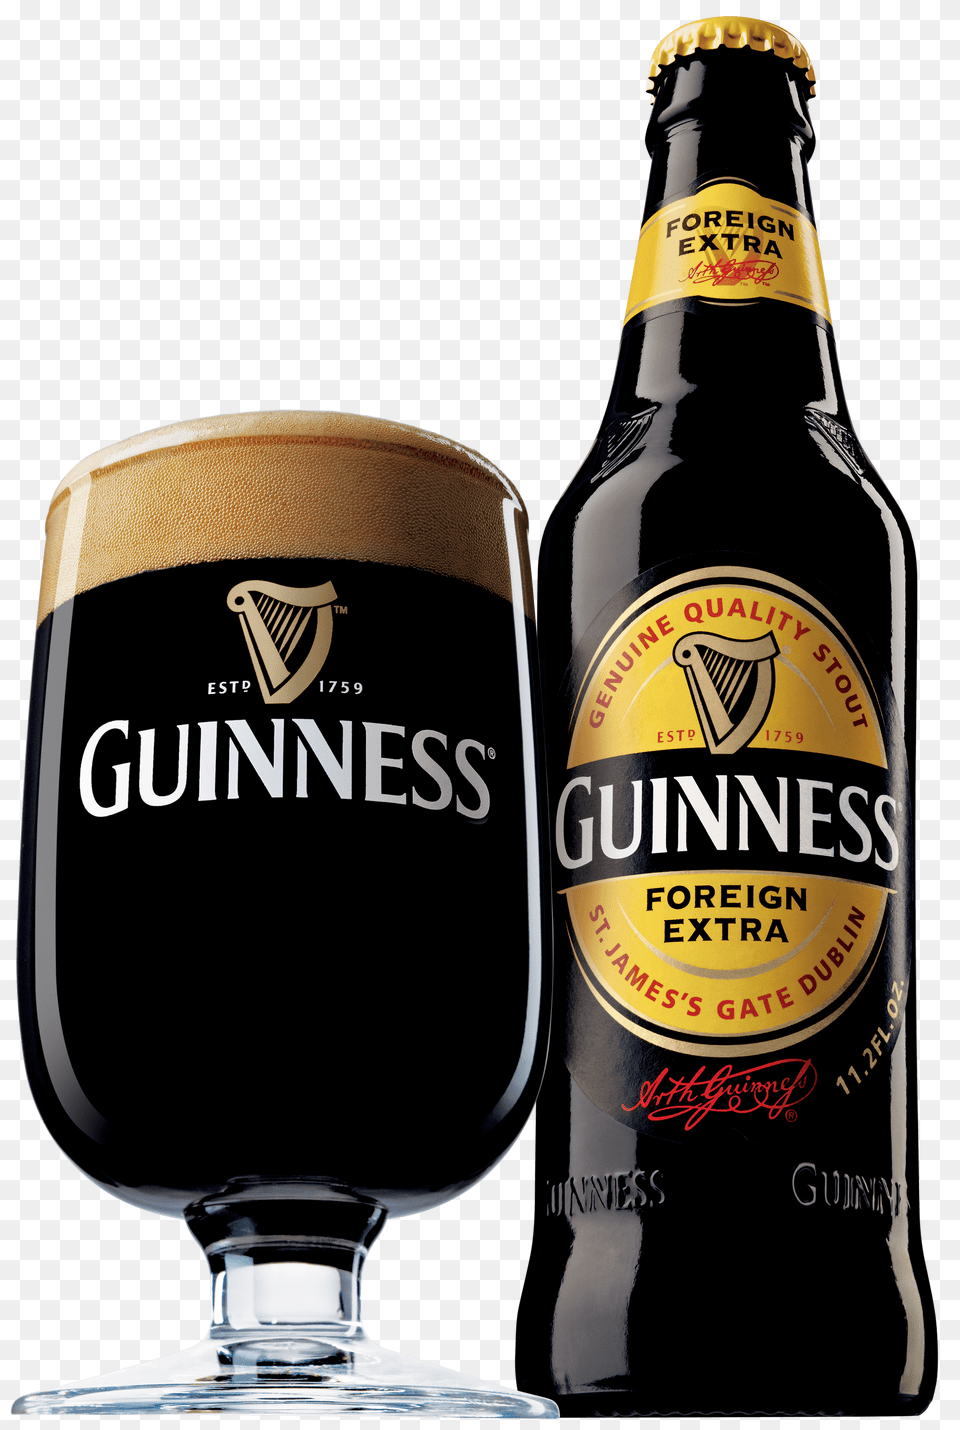 Guinness Foreign Extra Bottle And Glass, Alcohol, Beer, Beverage, Stout Free Transparent Png